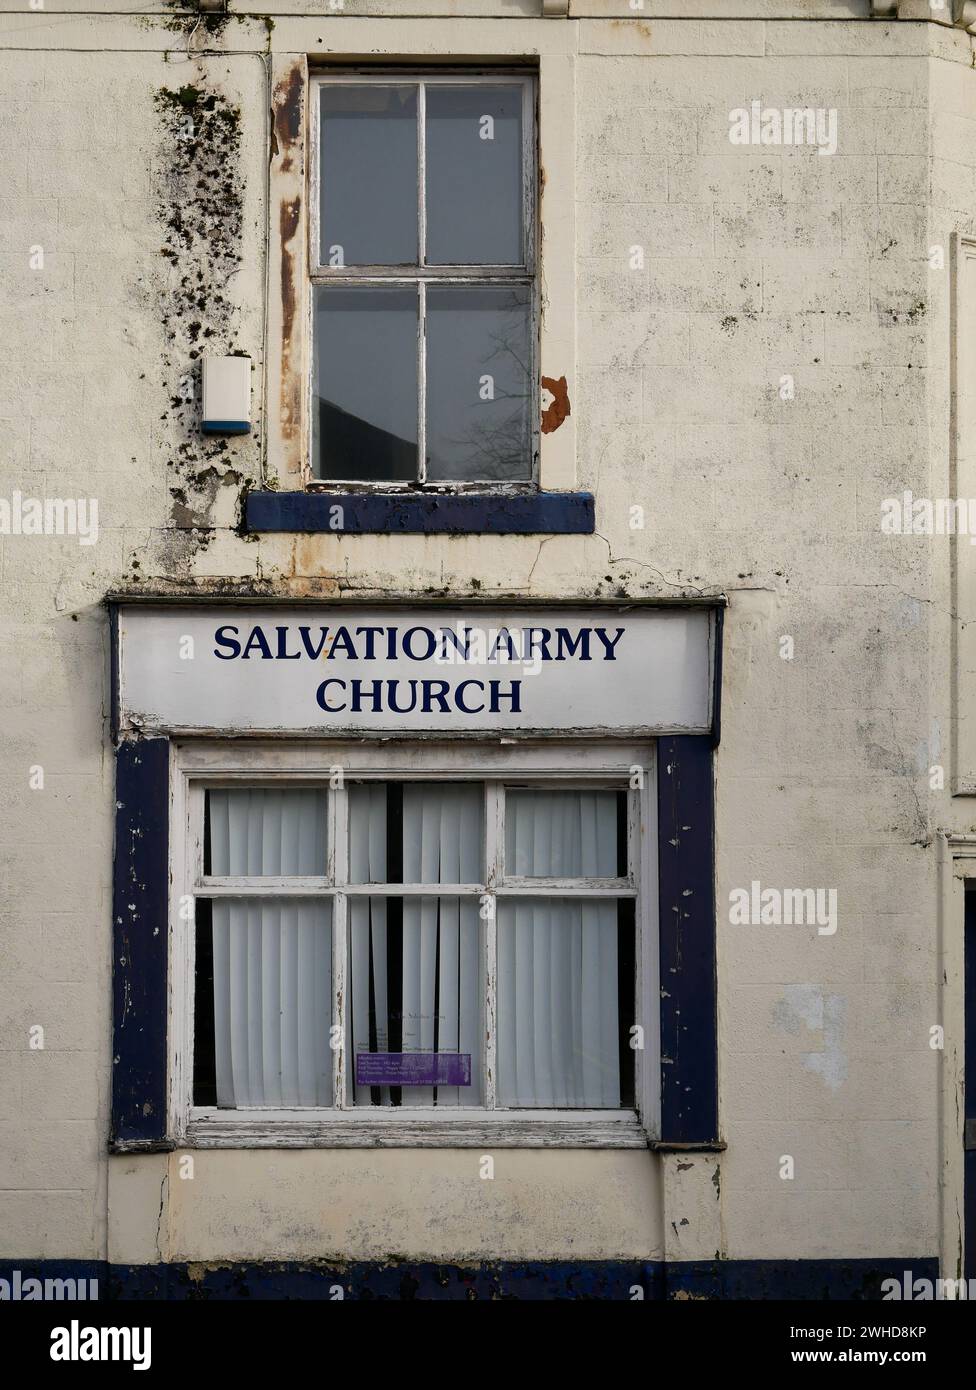 View of the Salvation Army Church showing its peeling paintwork and generally neglected appearance Stock Photo